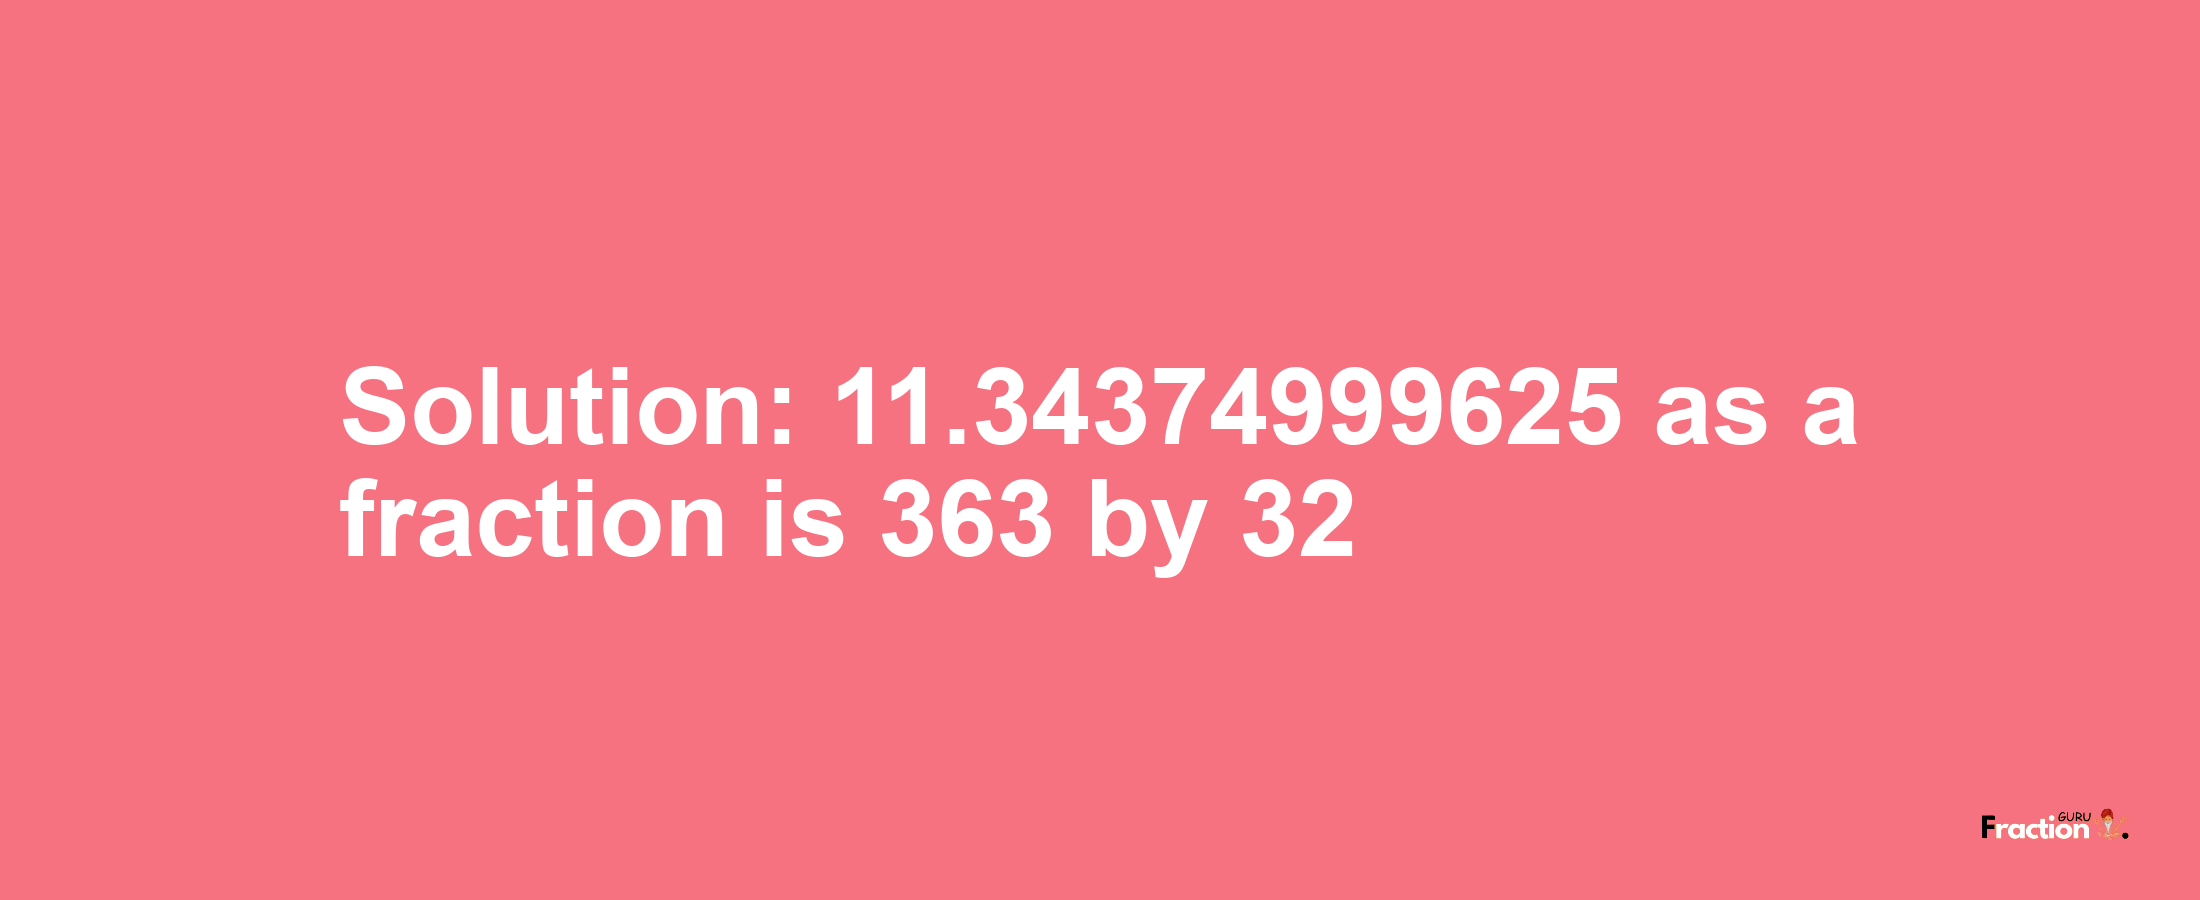 Solution:11.34374999625 as a fraction is 363/32